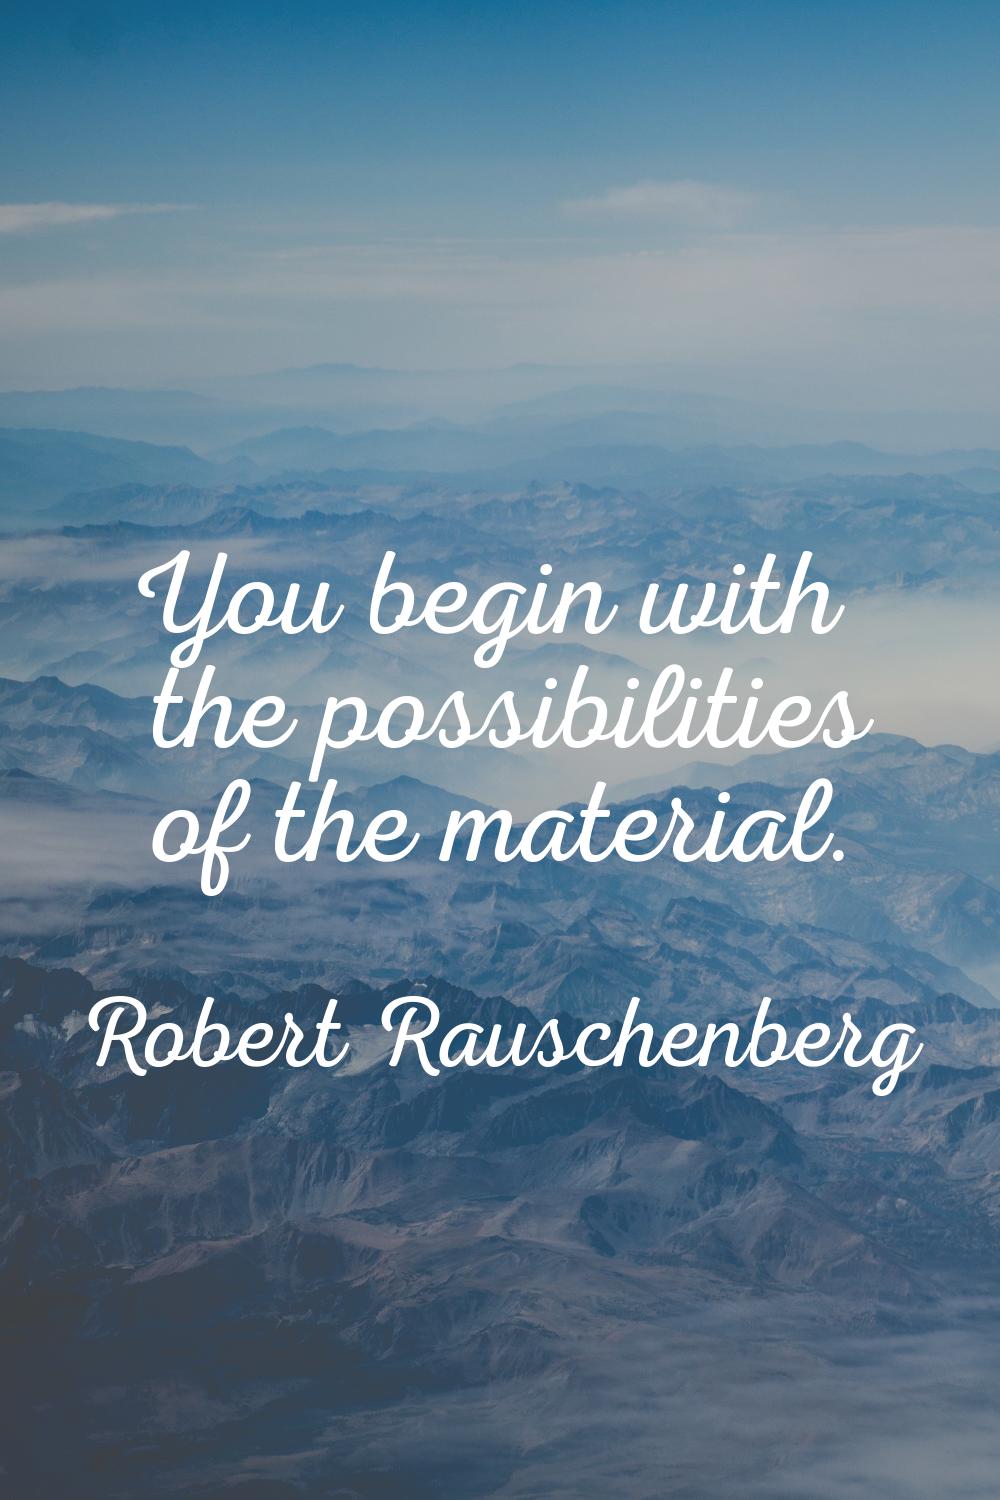 You begin with the possibilities of the material.